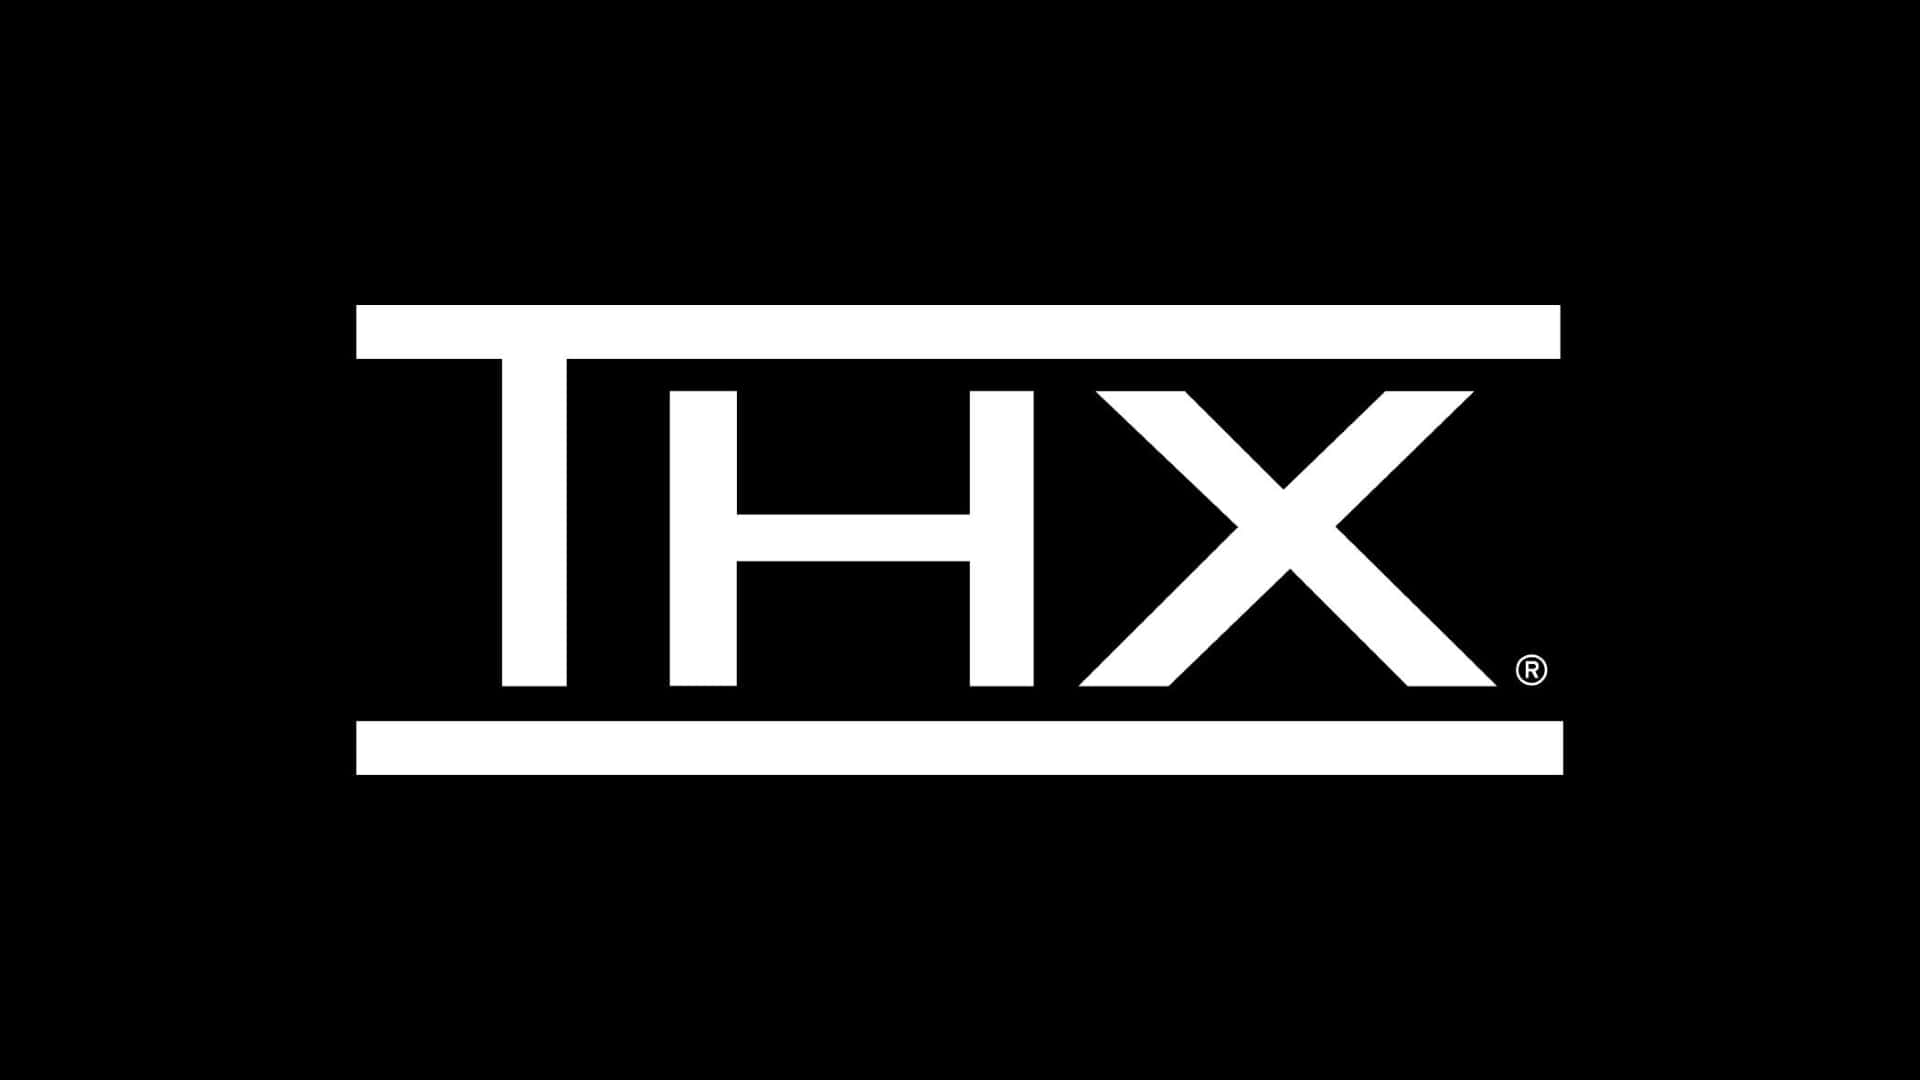 Welcome to Thx - an all-inclusive audio experience Wallpaper